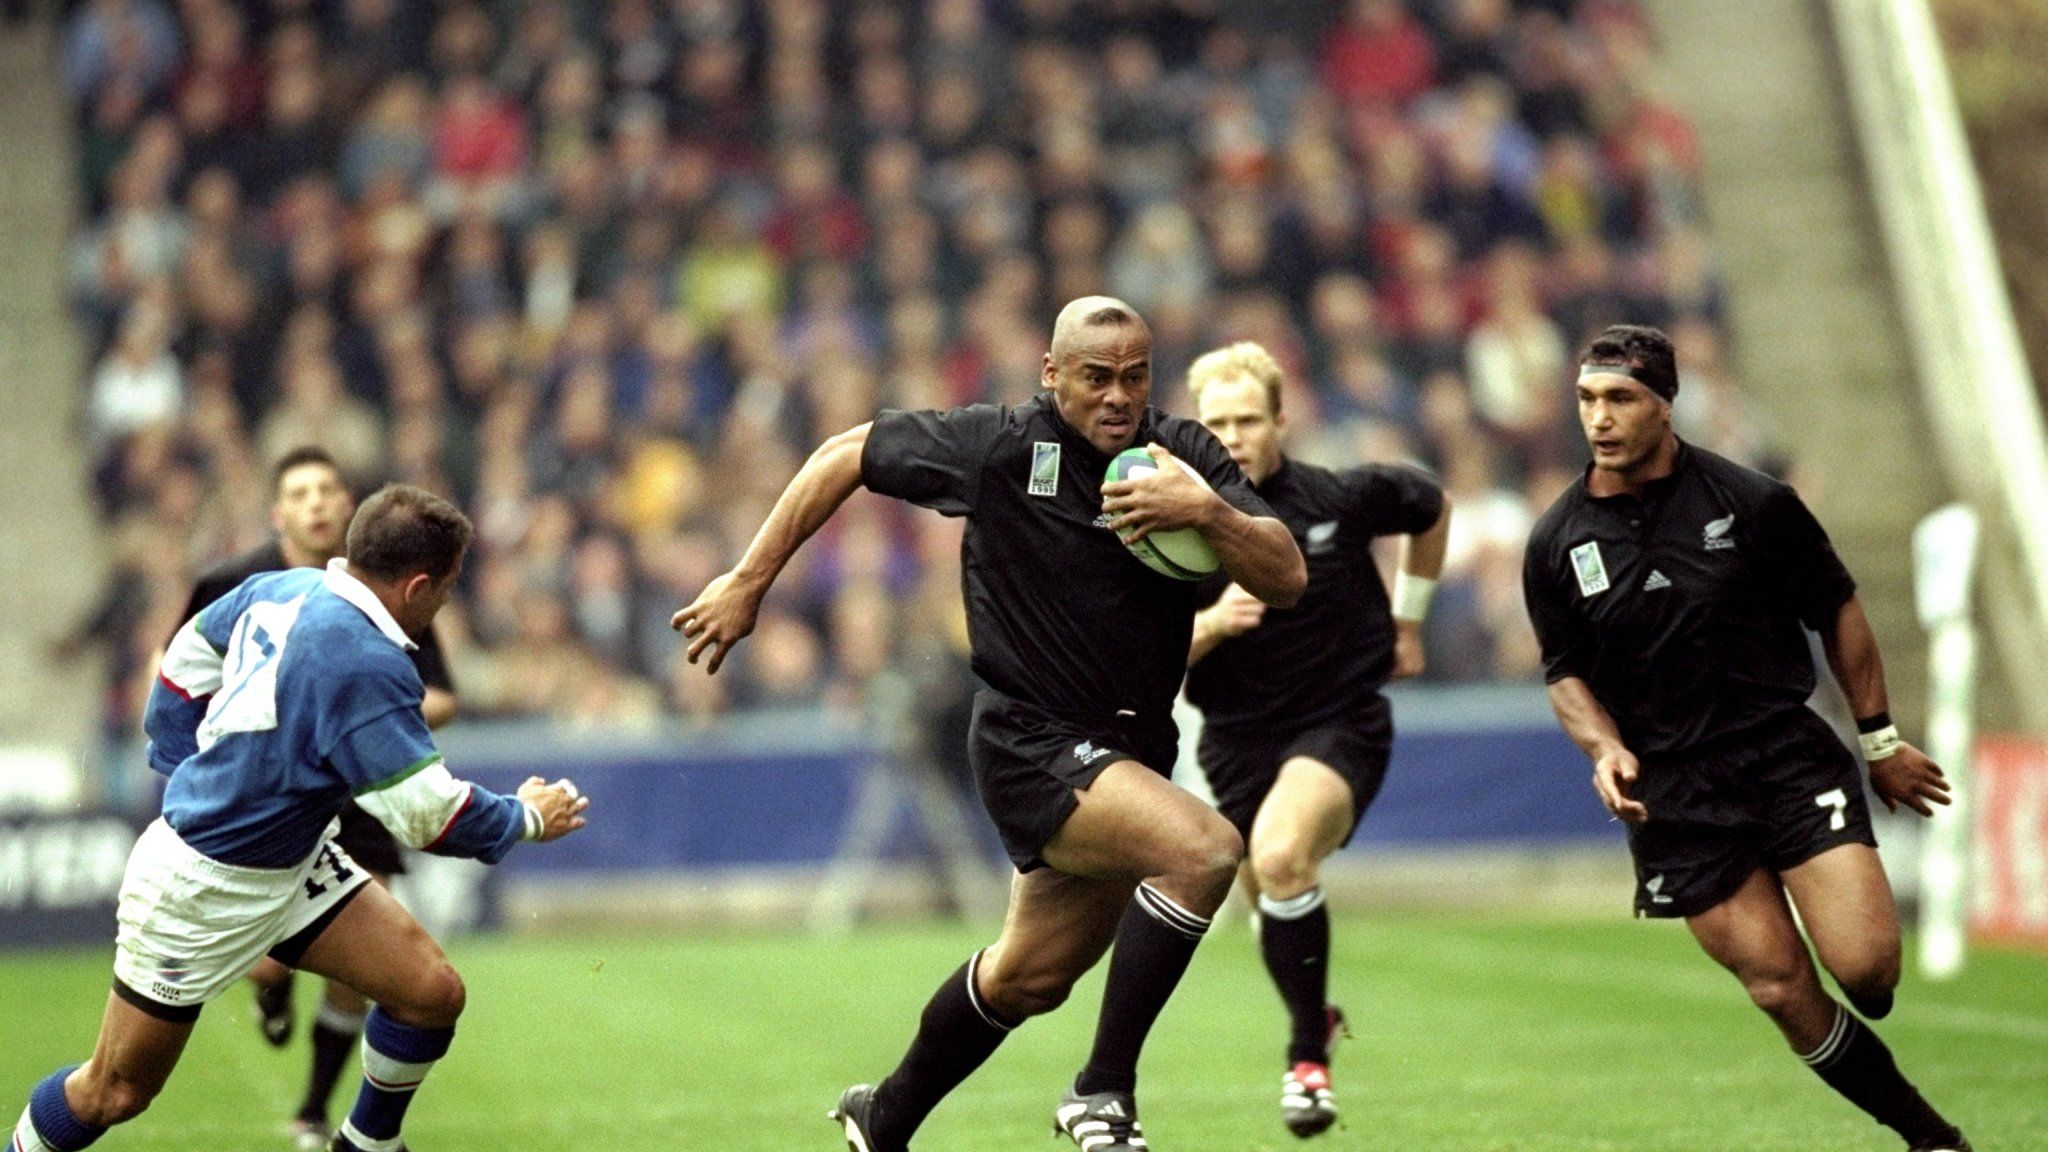 Jonah Lomu 1975 2015: Rugby Union's First Global Superstar. Rugby Union News